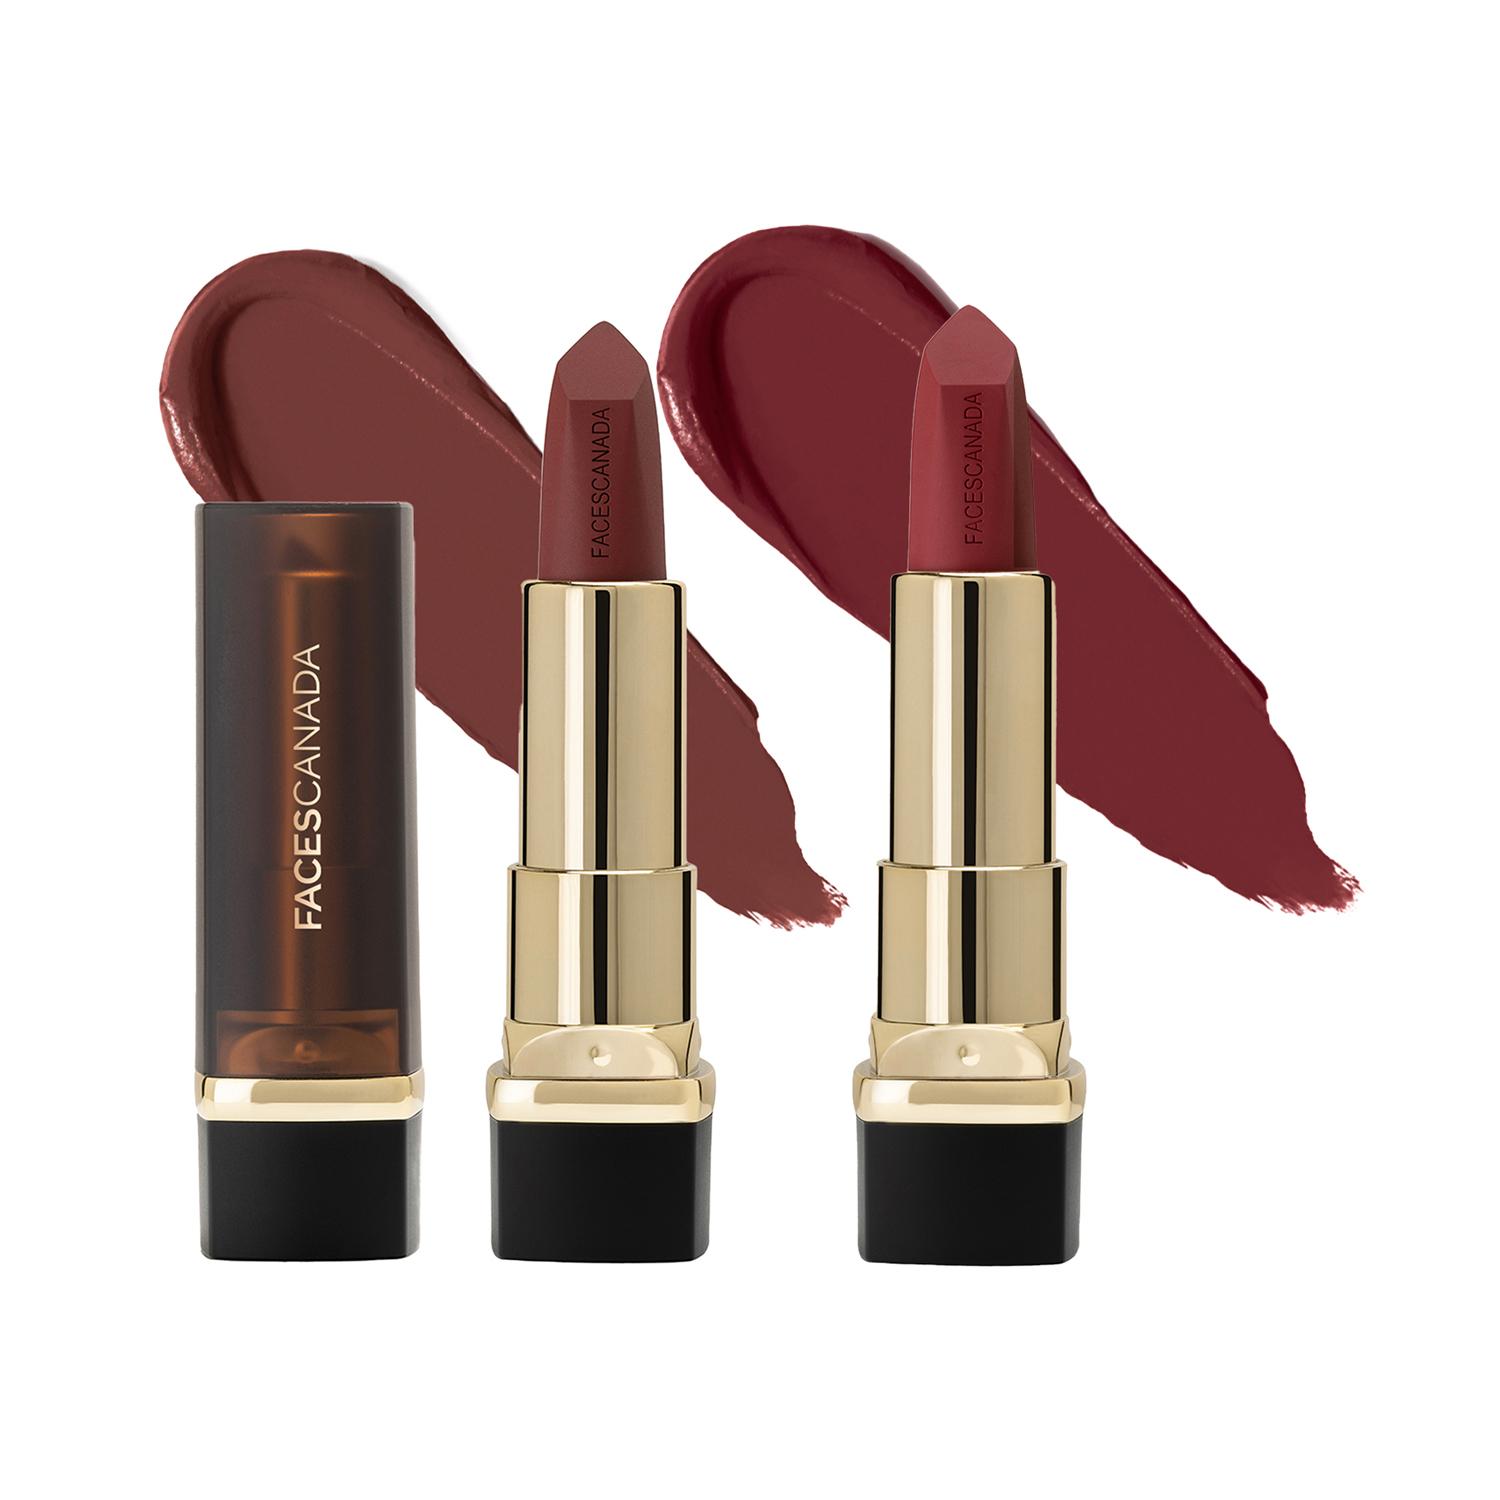 Faces Canada | Faces Canada Festive Hues - Comfy Matte Creme Lipstick Pack of 2 - Raise The Roof & Not A Quitter